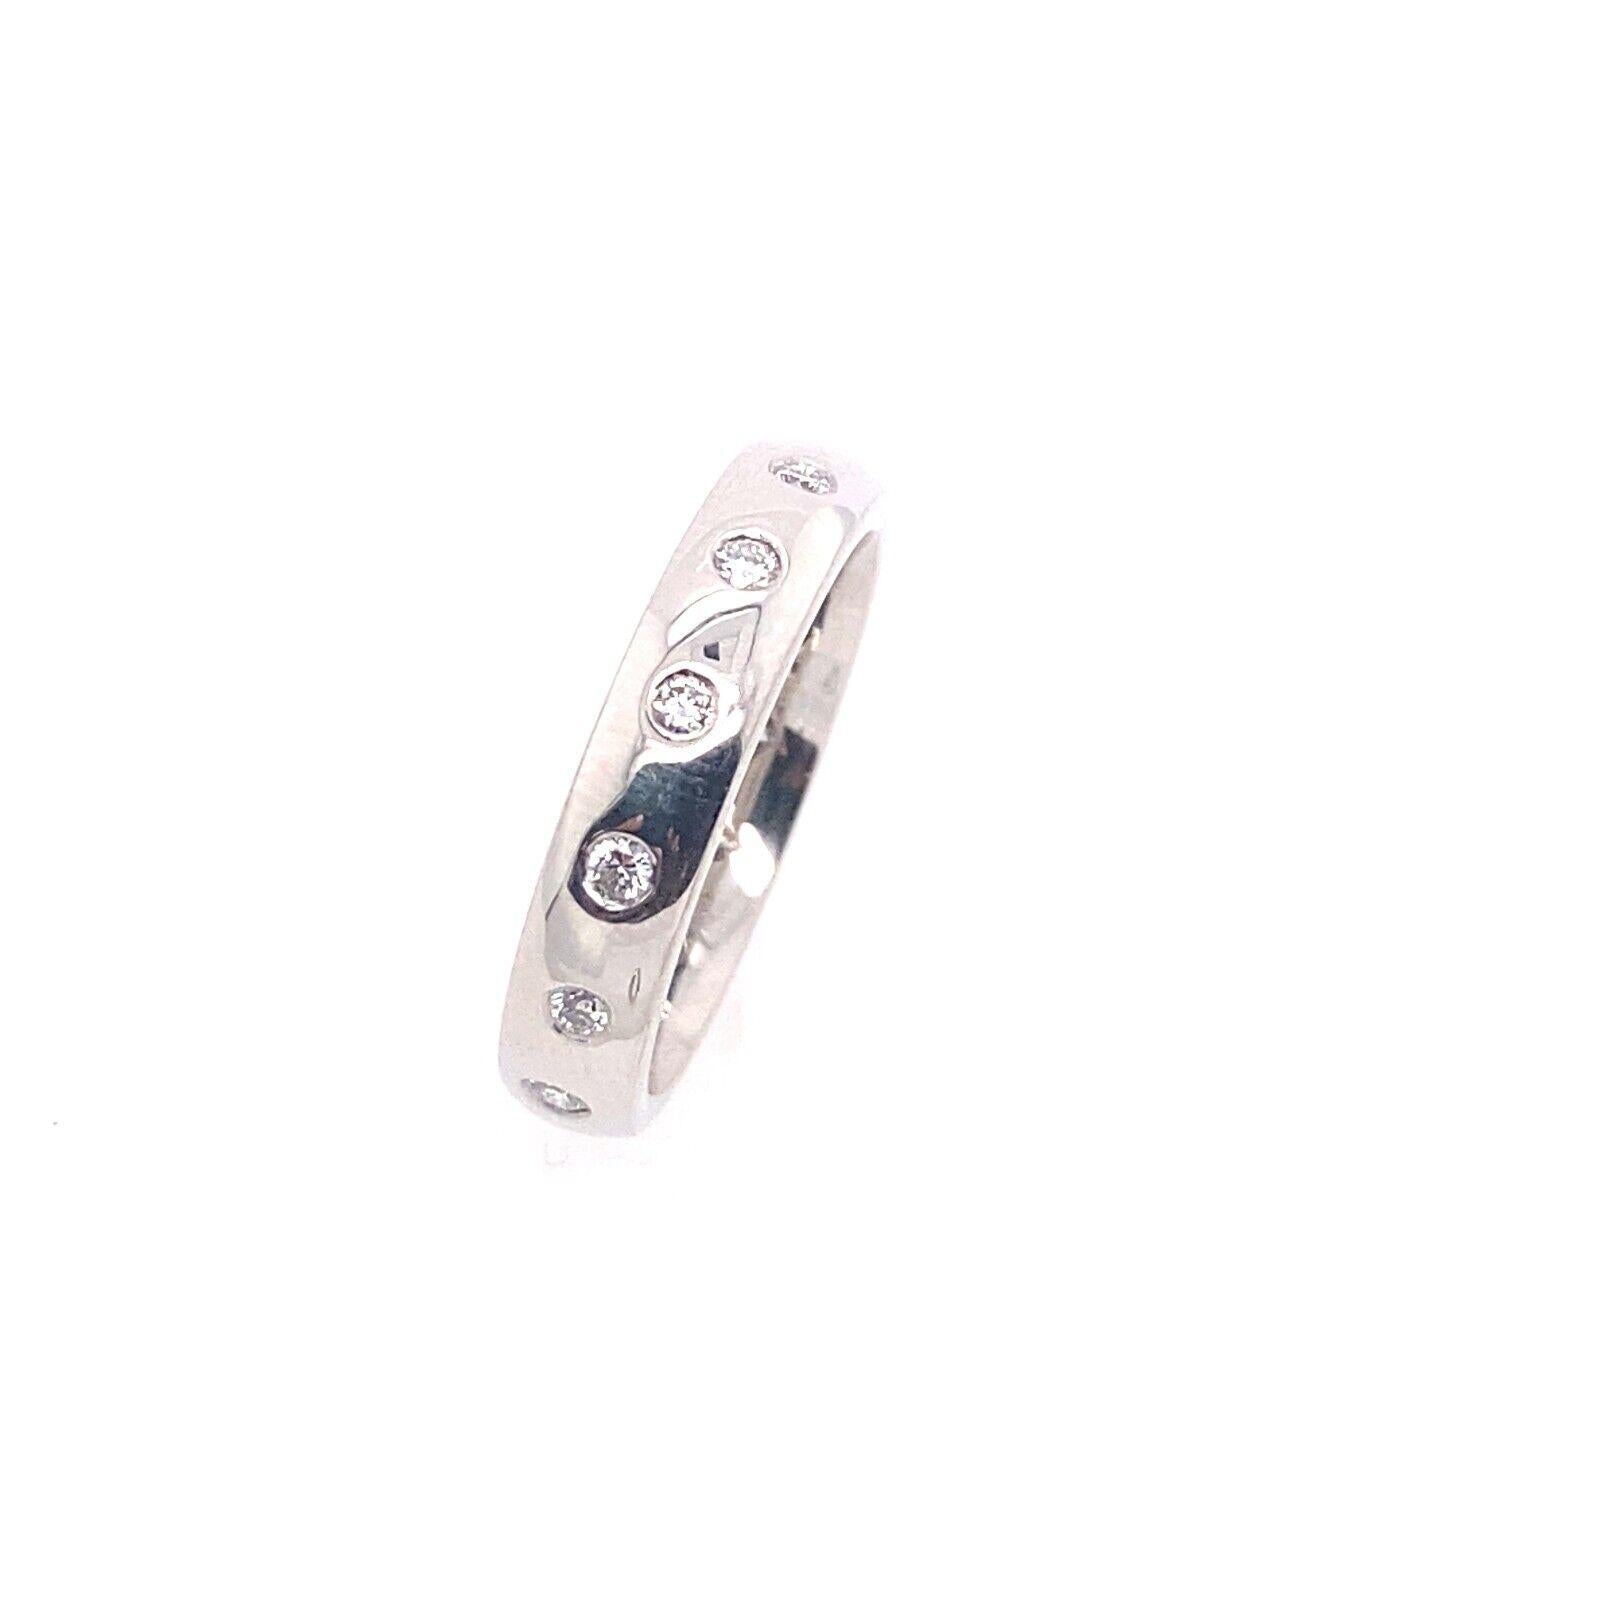 This beautiful 18ct white gold eternity/wedding band is set with 0.40ct of diamonds. The band has a total of 14 diamonds set in delicate bezel settings. It is a perfect choice for stacking with other rings or wearing on its own.

Additional